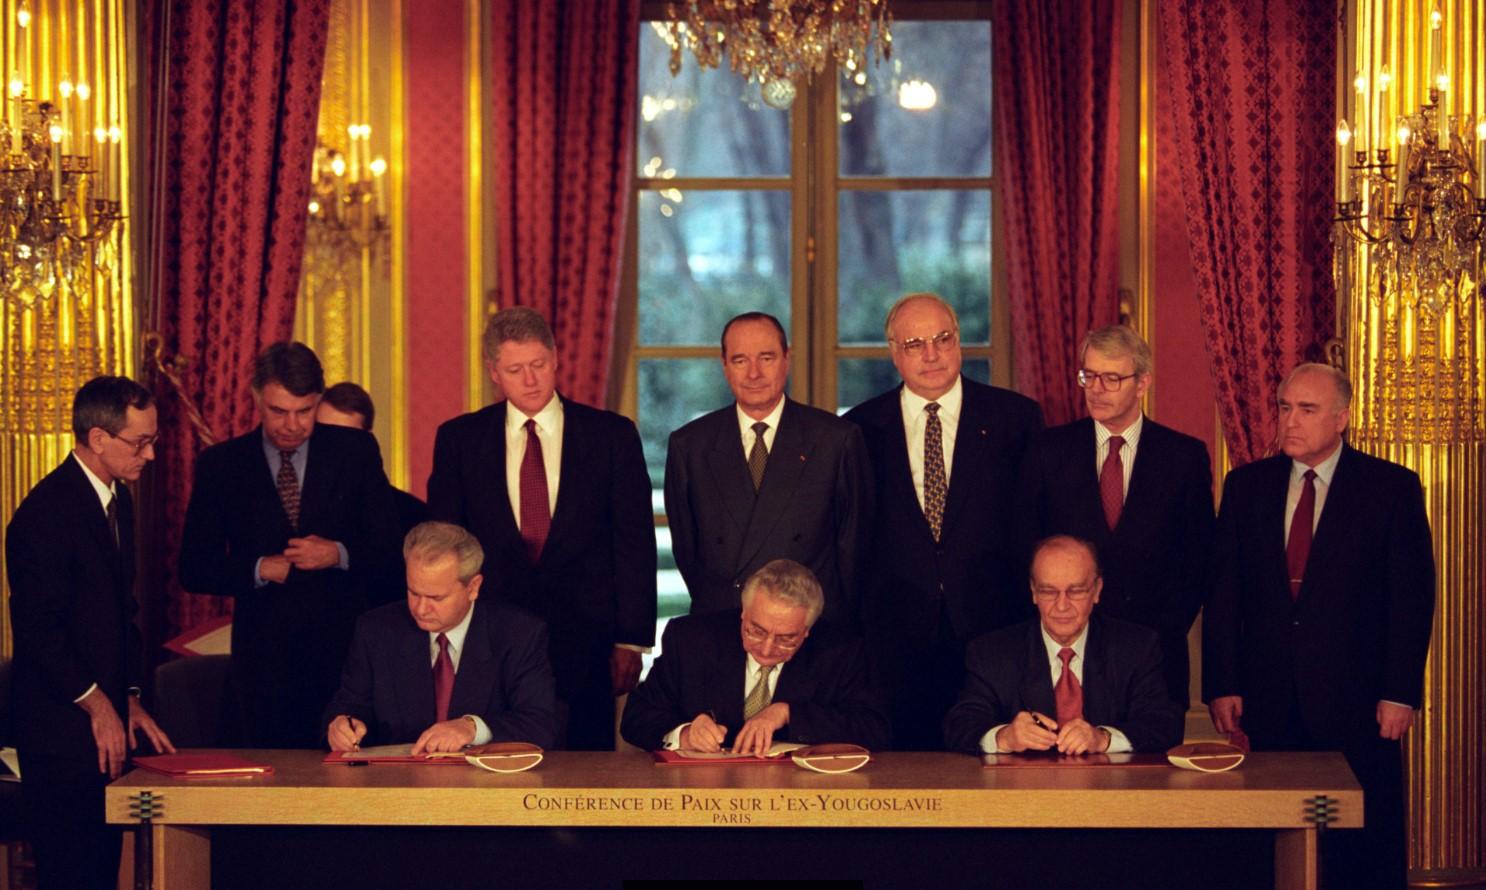 Agreement was signed on December 14th, 1995. - Avaz